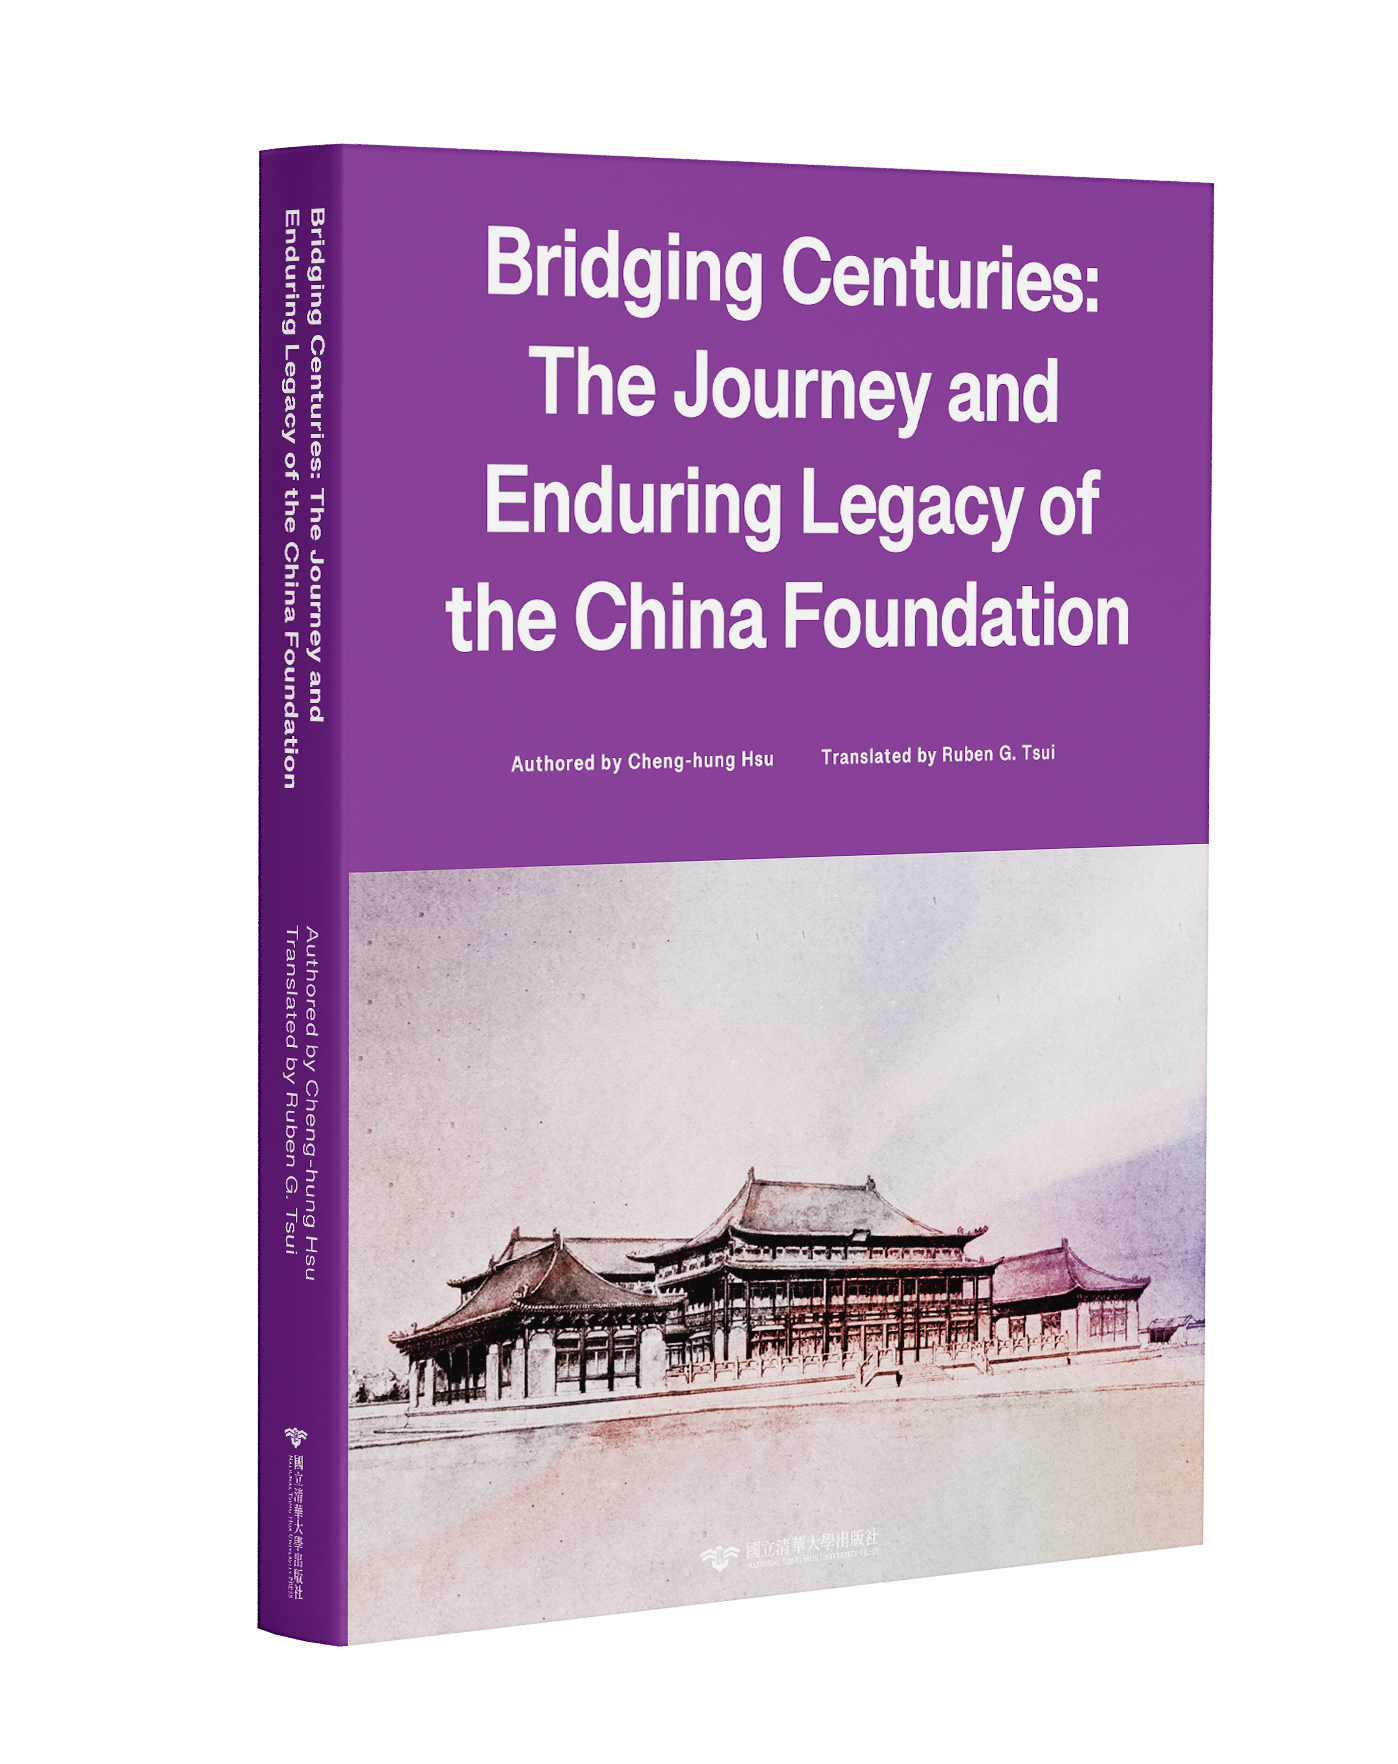 Bridging Centuries: The Journey and Enduring Legacy of the China Foundation